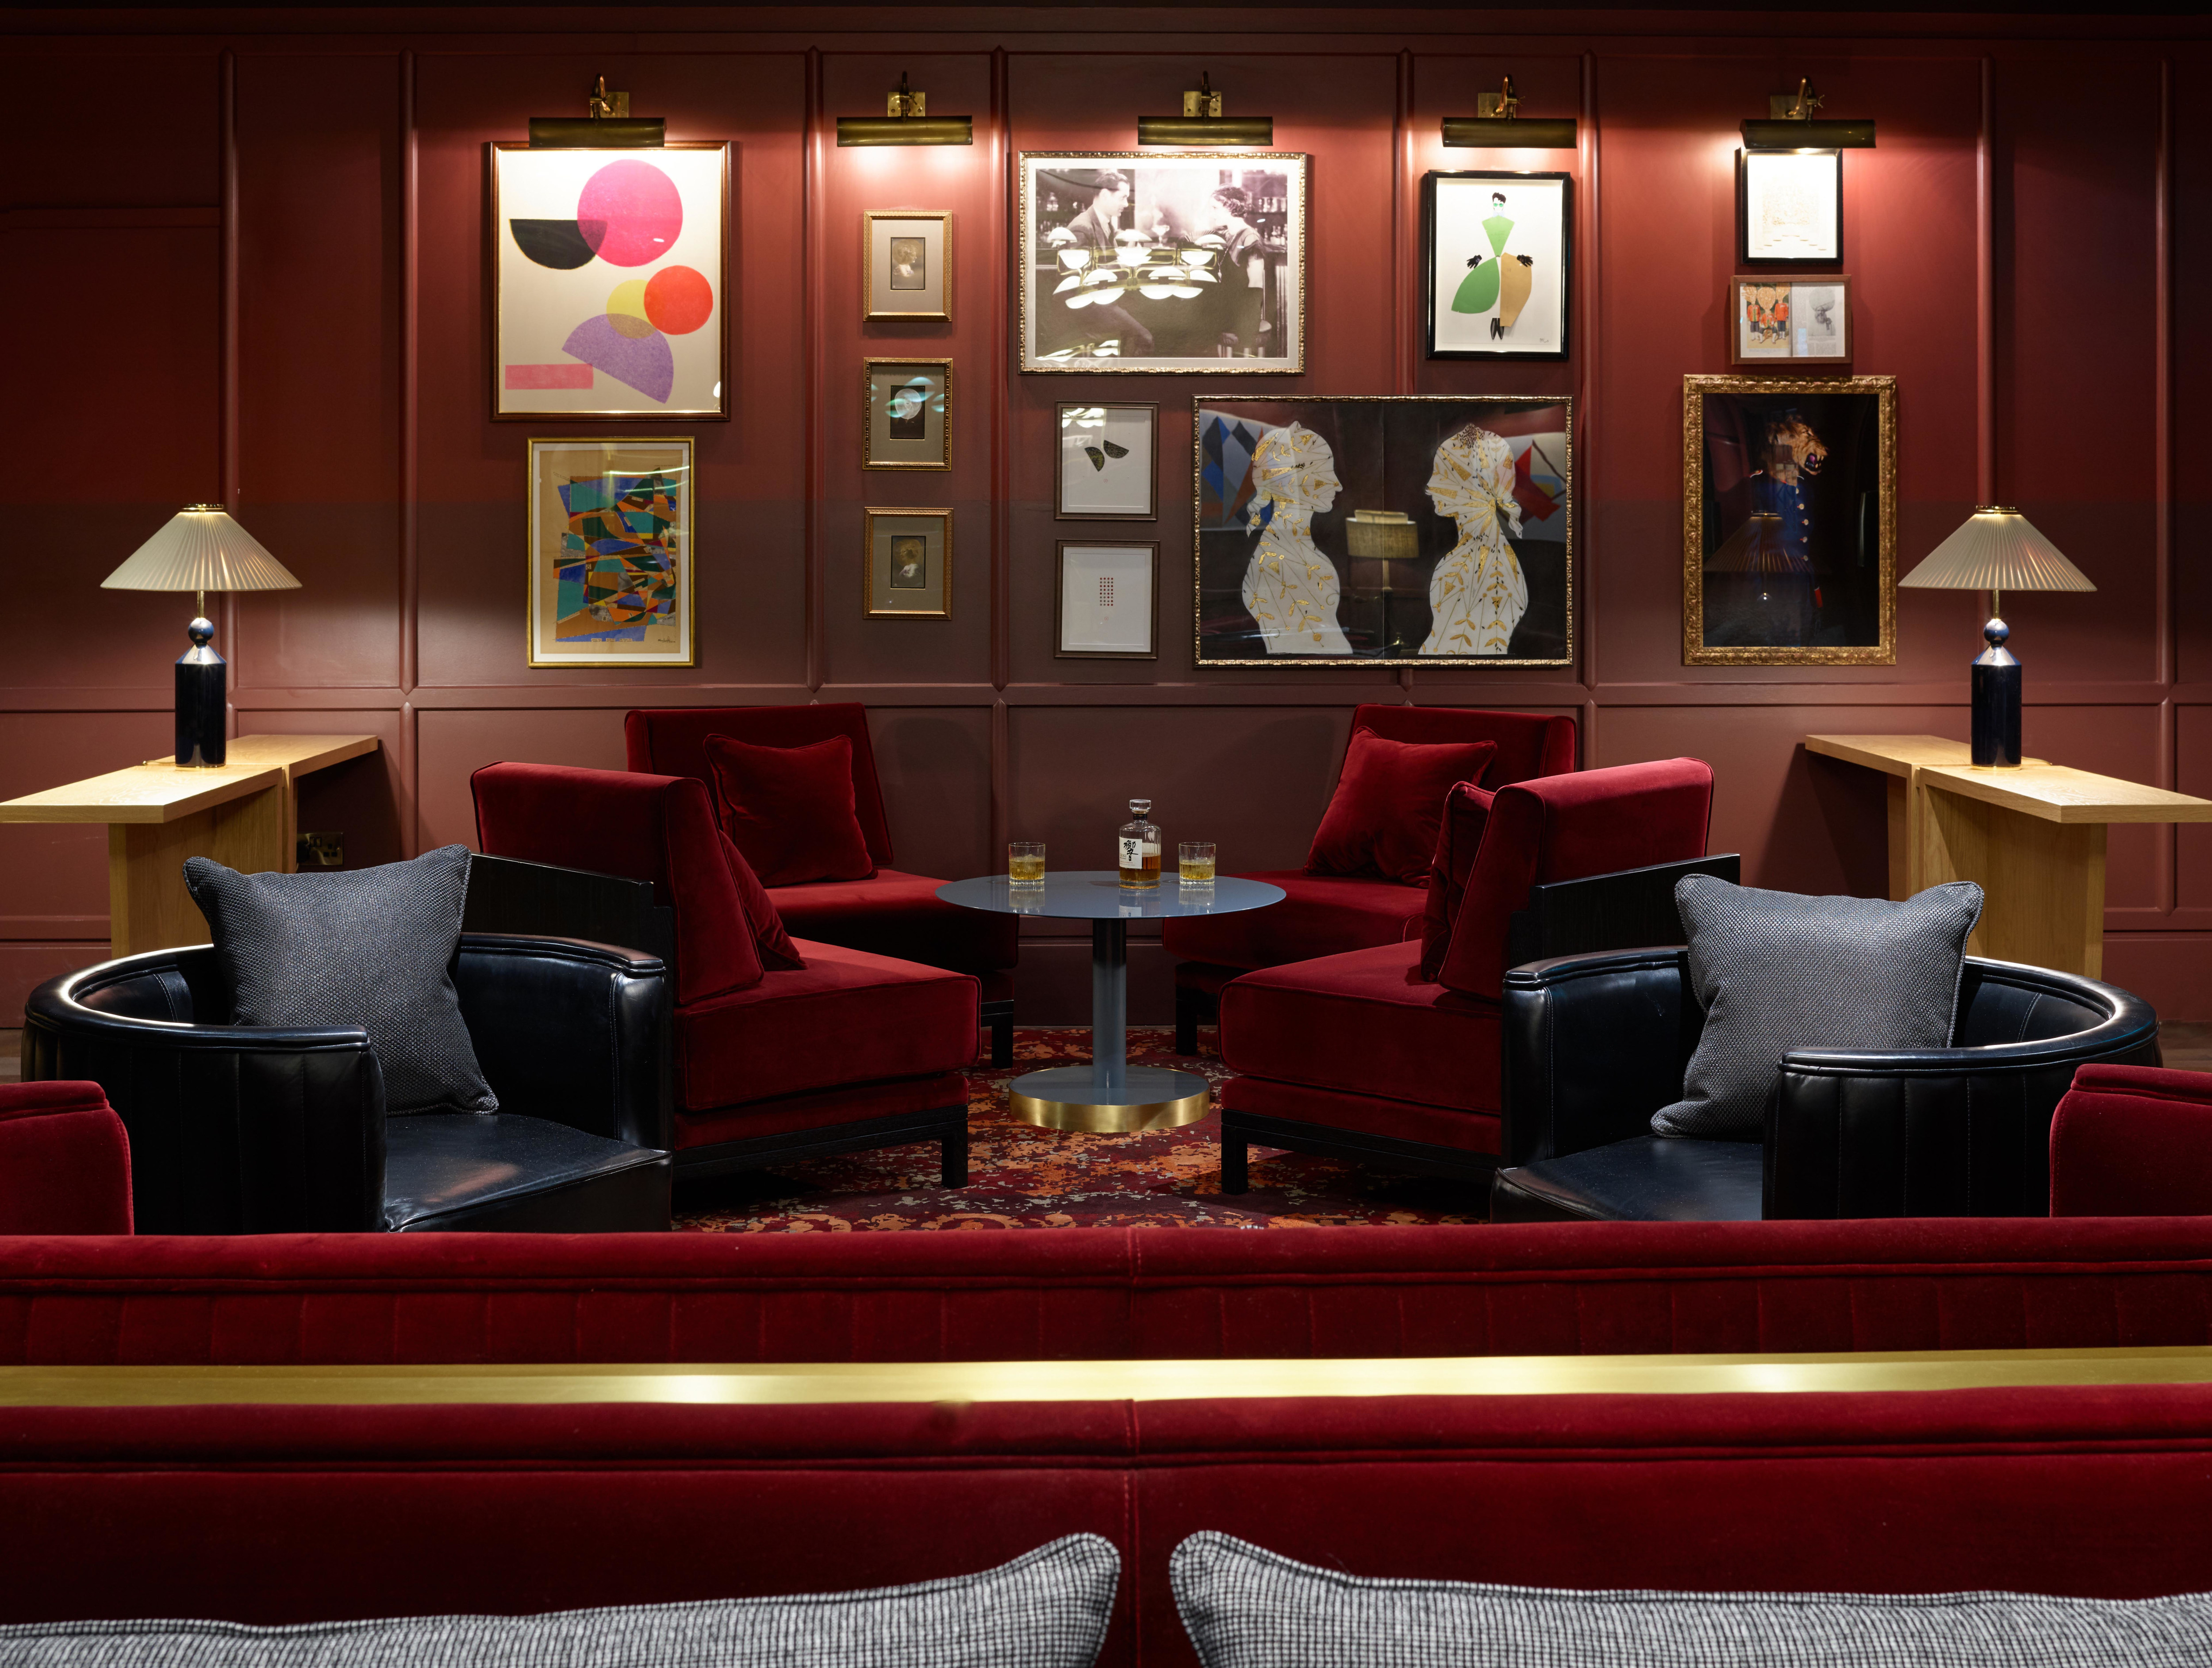 Cocktail lounge in restaurant with soft chairs,coffee table, and art on the wall